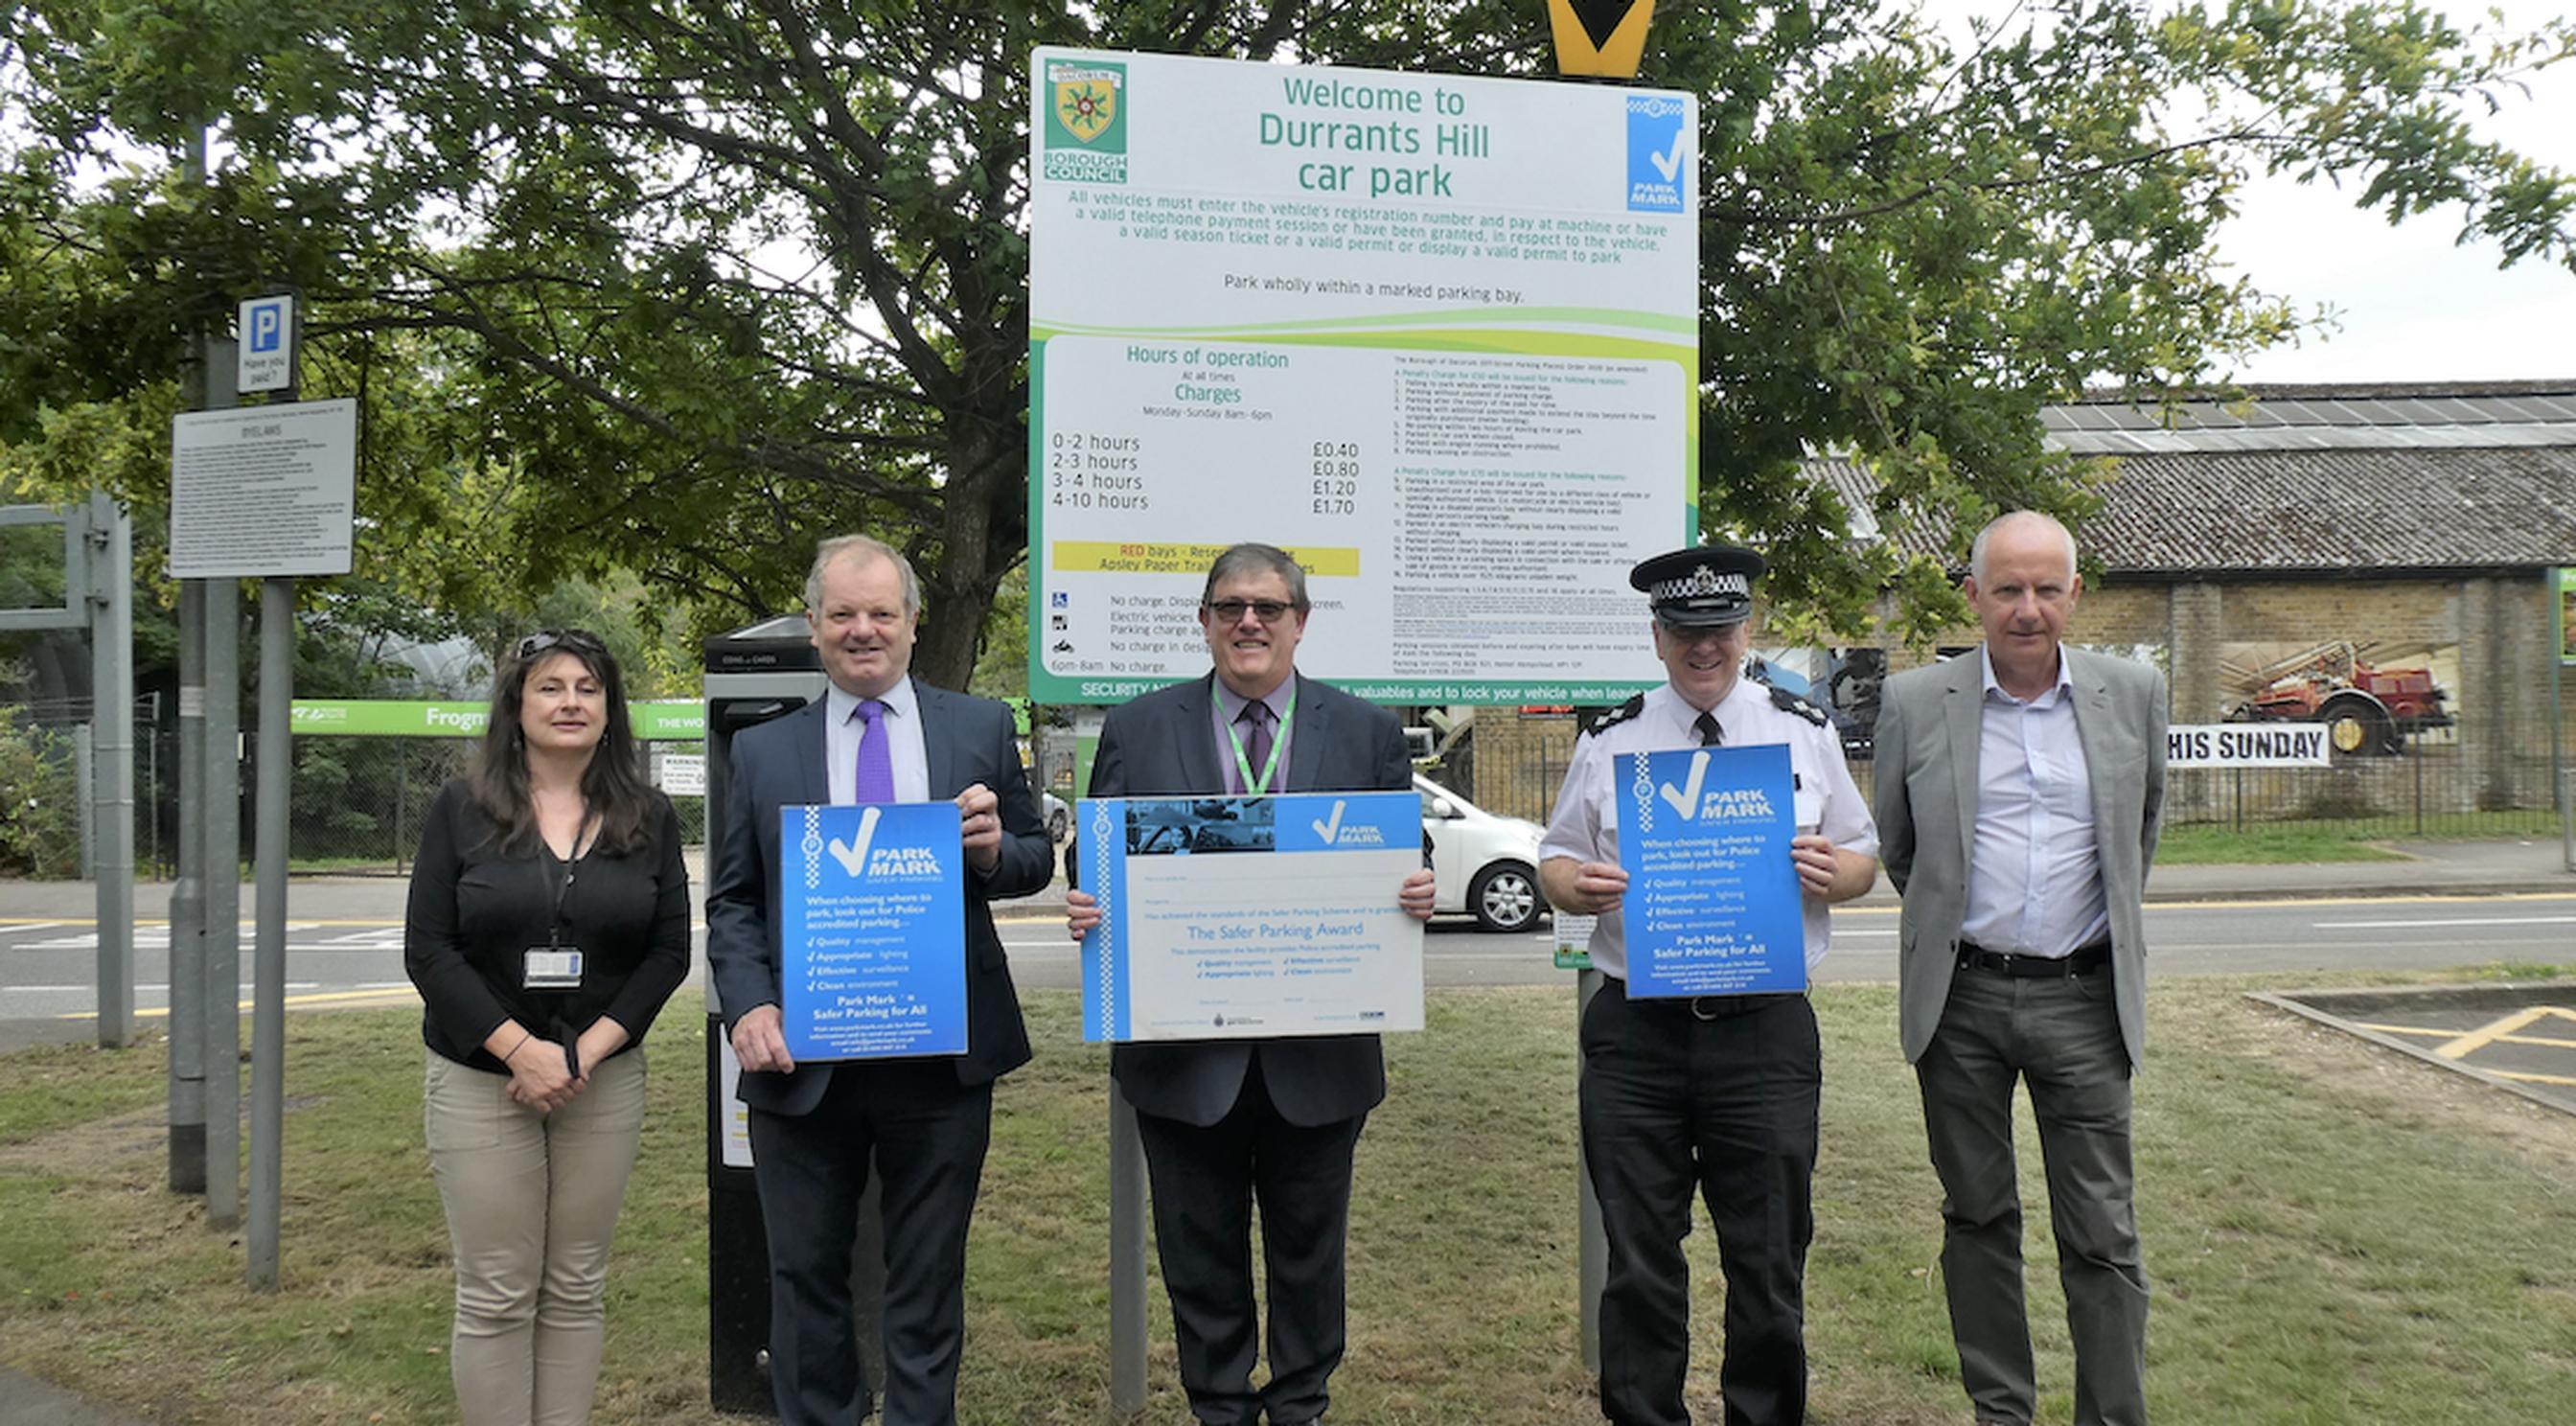 Sophie Groombridge, Designing Out Crime officer at Hertfordshire Constabulary, Cllr Andrew Williams, leader of Dacorum Borough Council, Steven Barnes, parking services team leader, Inspector Jeff Scott  and Antony Powell BPA area manager